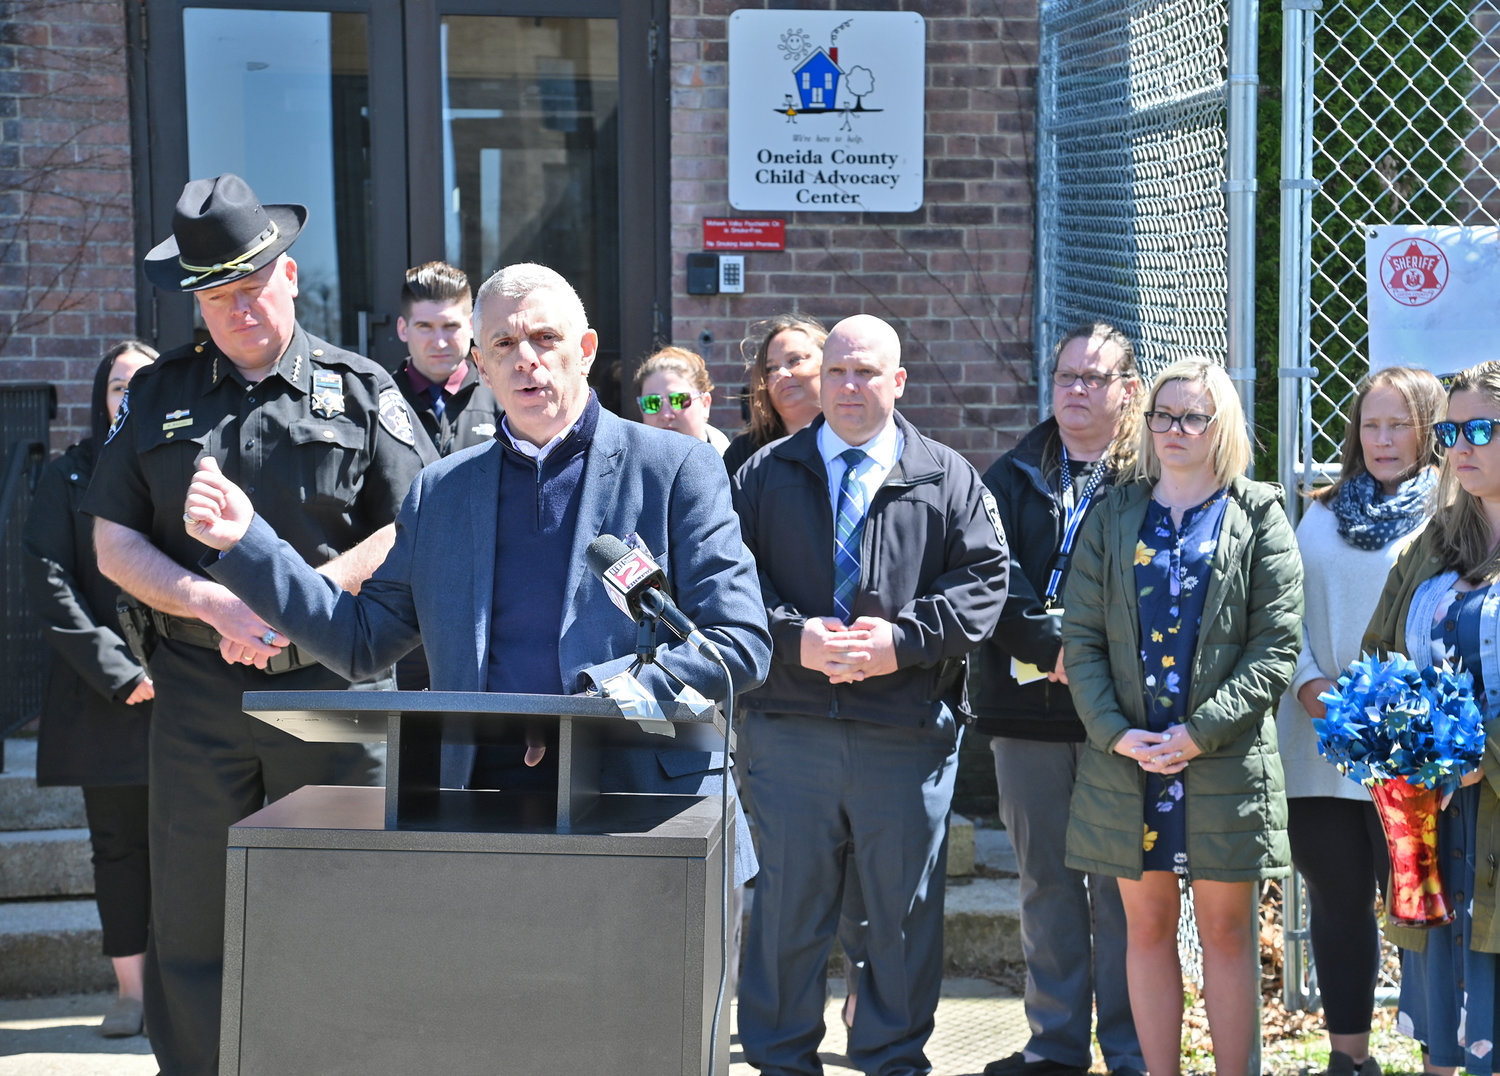 PICENTE REMEMBERS — Oneida County Executive Anthony J. Picente marks another National Child Abuse Prevention Month at the Child Advocacy Center in Utica. Picente said he is very proud of the work being done at the center, and holds an annual event to help spread awareness.